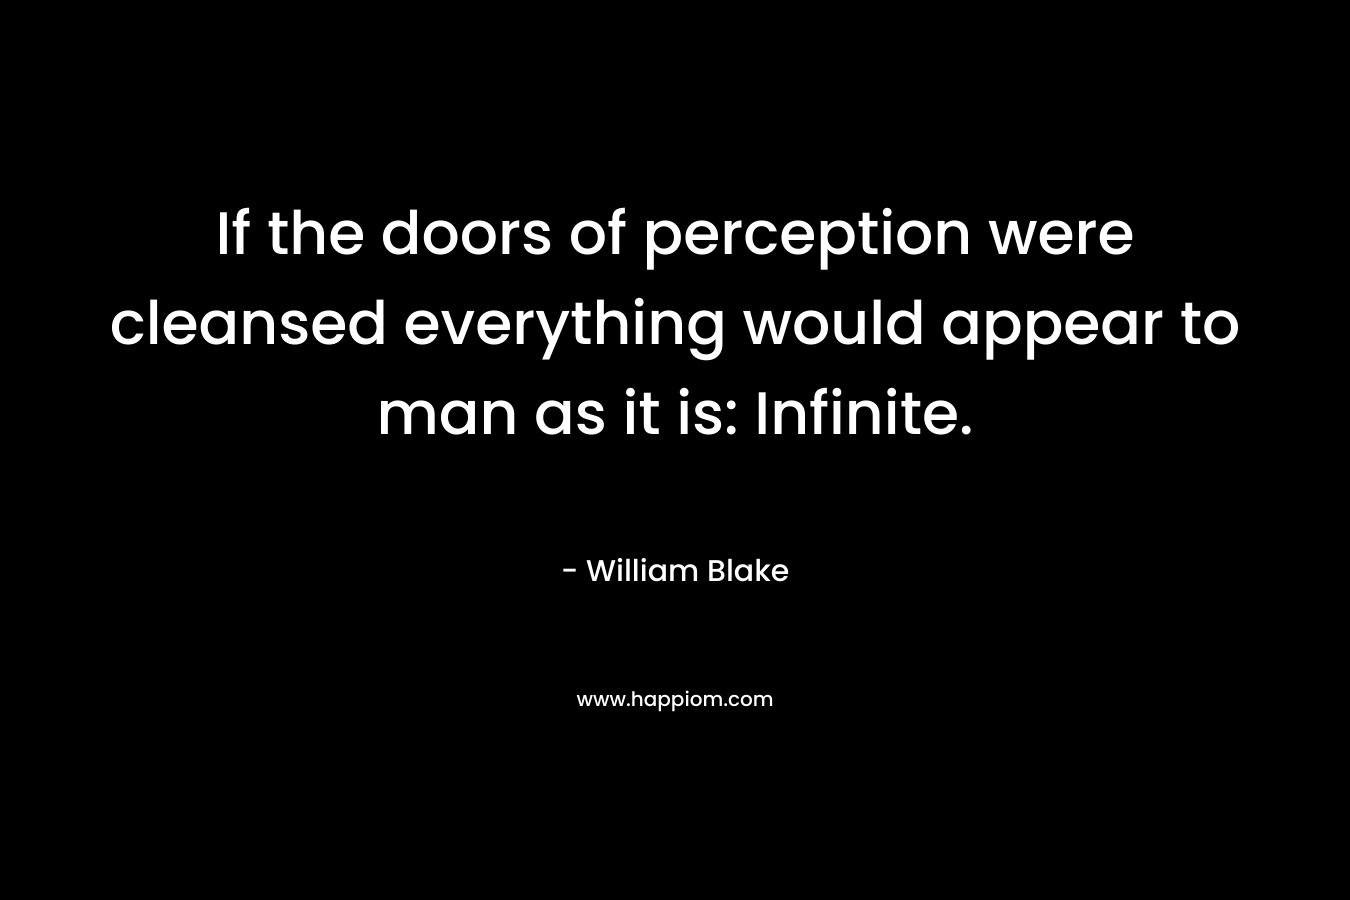 If the doors of perception were cleansed everything would appear to man as it is: Infinite.